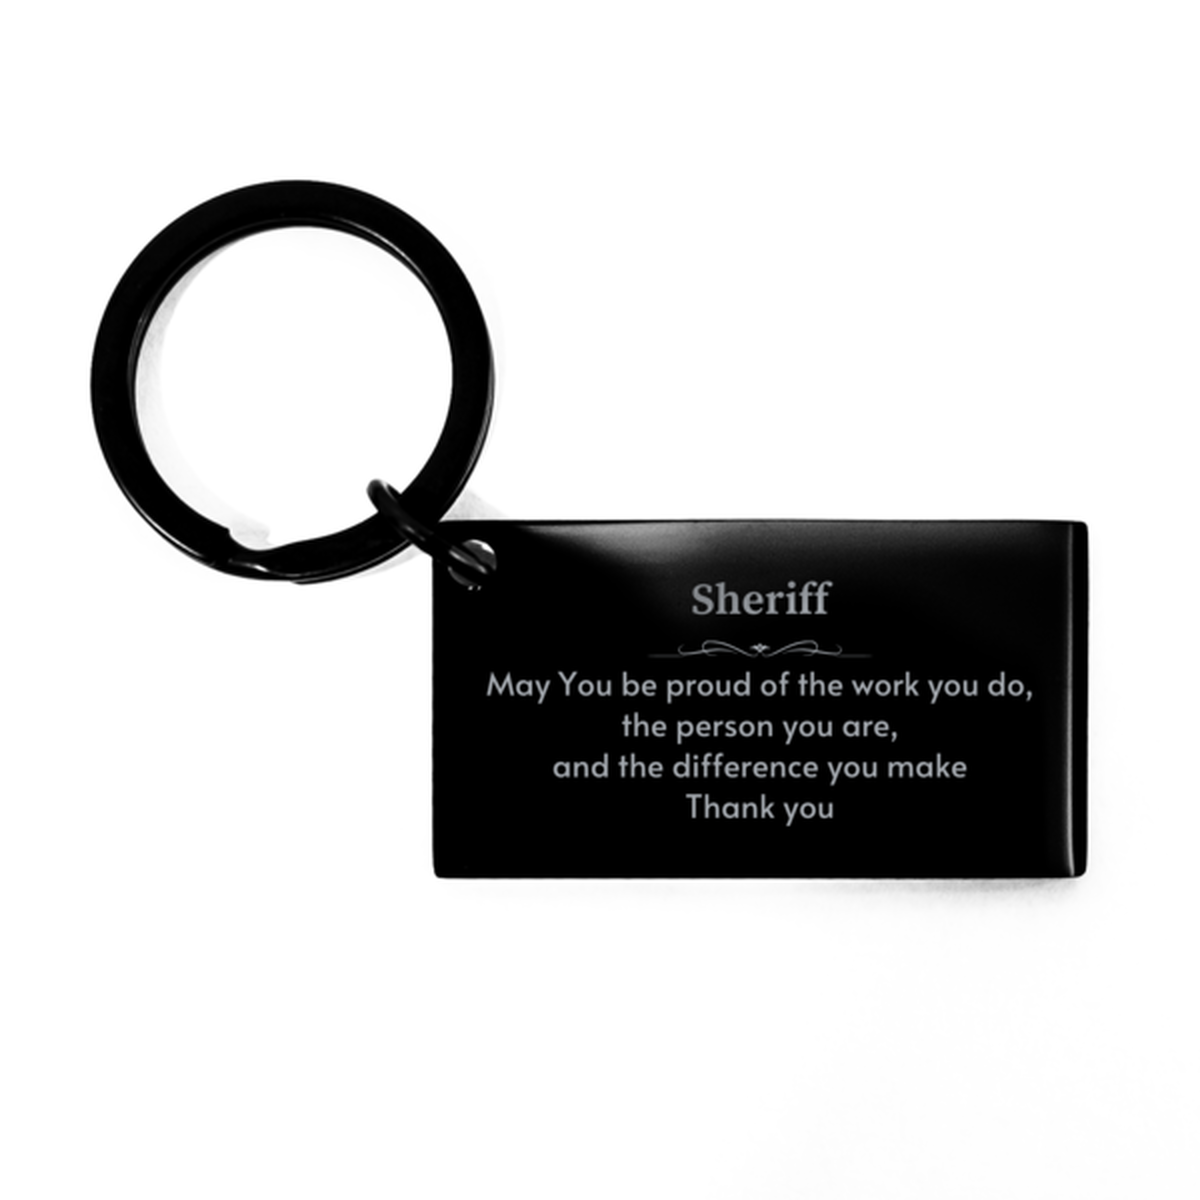 Heartwarming Keychain Retirement Coworkers Gifts for Sheriff, Vice President May You be proud of the work you do, the person you are Gifts for Boss Men Women Friends